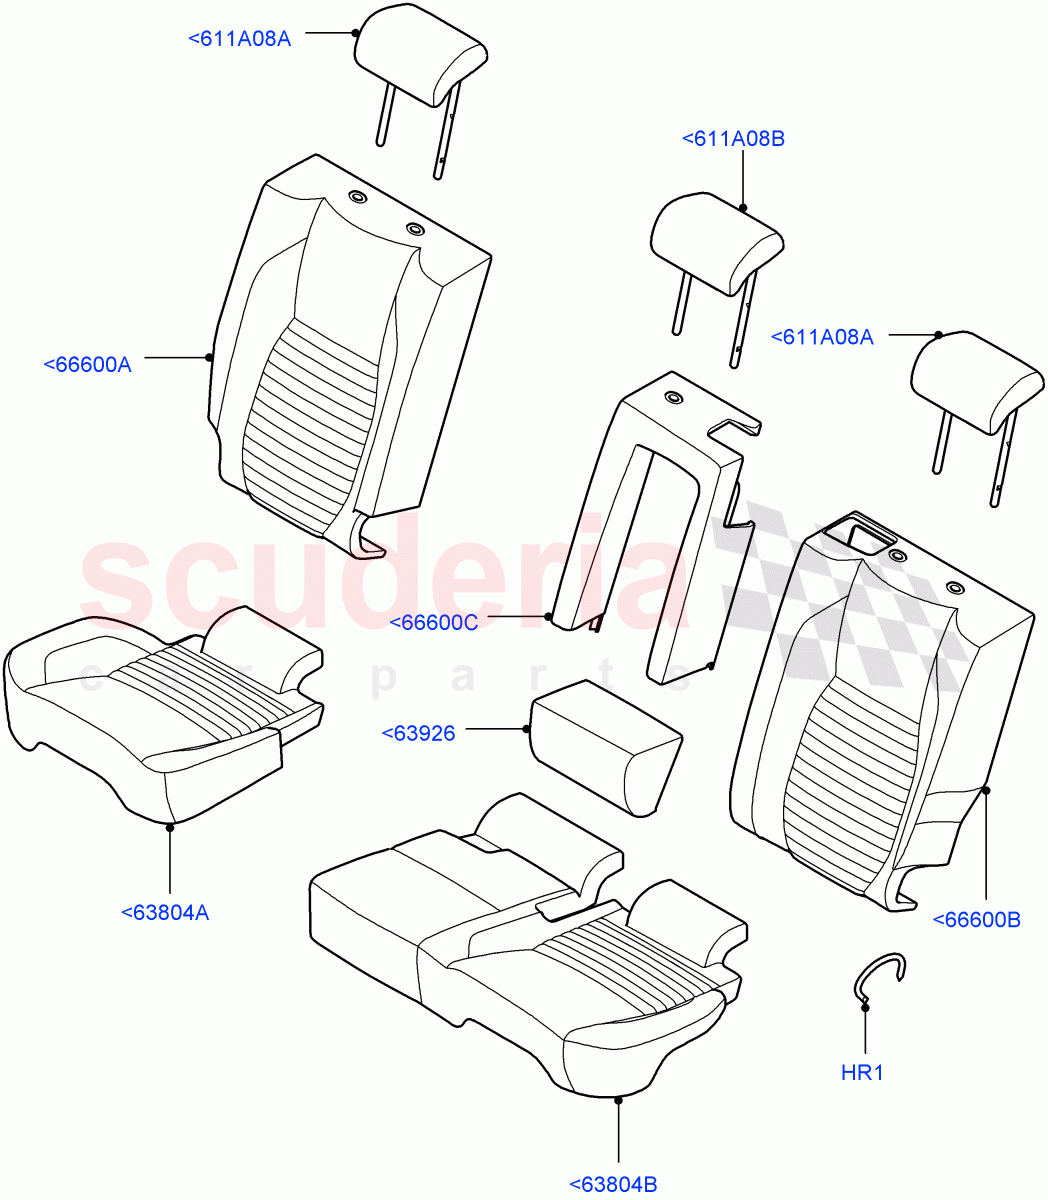 Rear Seat Covers(Taurus Leather Perforated,Itatiaia (Brazil),60/40 Load Through With Slide)((V)FROMLT000001) of Land Rover Land Rover Discovery Sport (2015+) [2.2 Single Turbo Diesel]